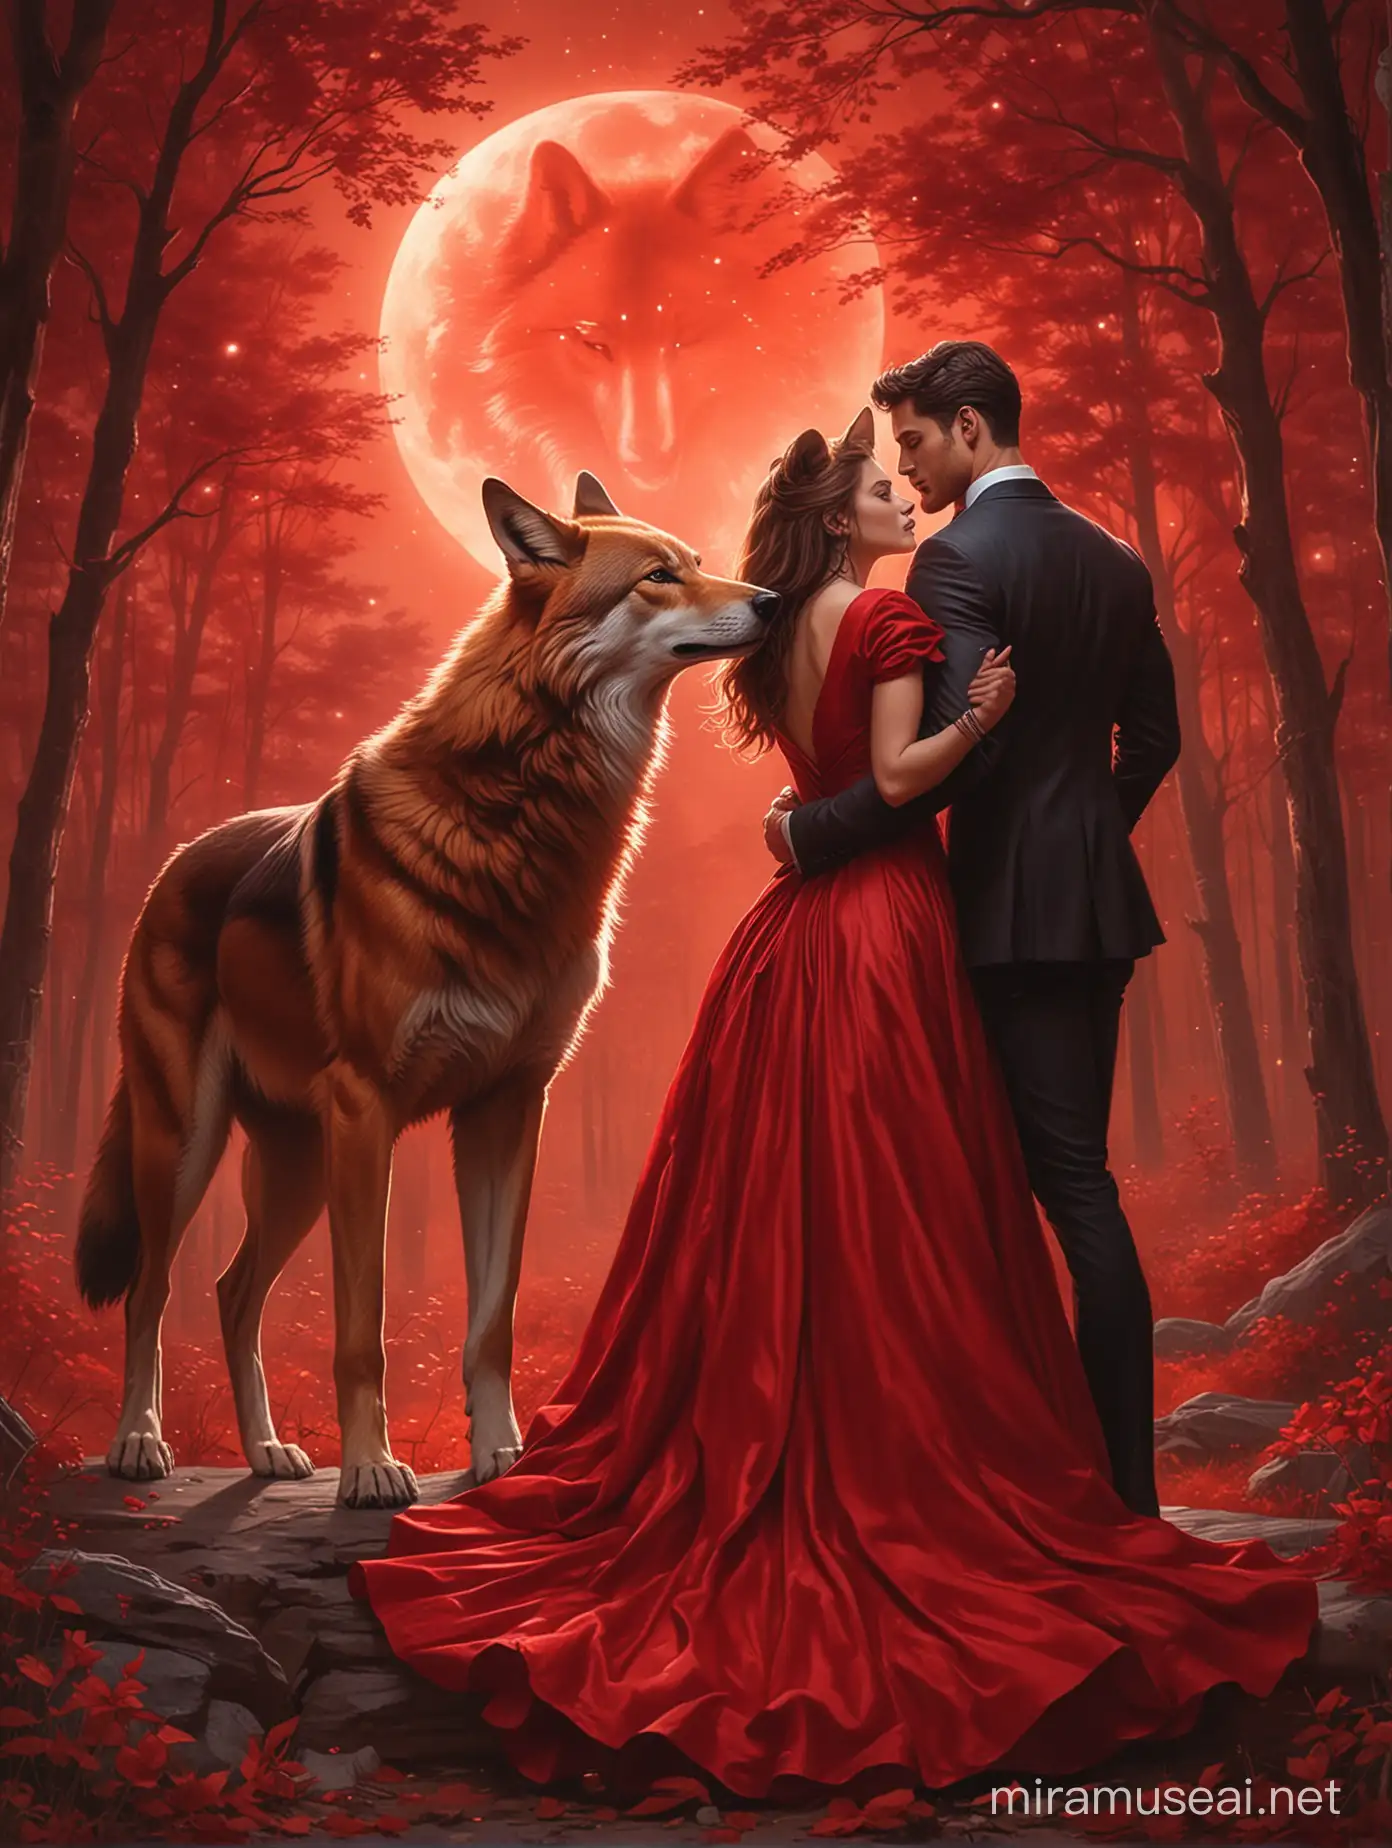 A beautiful lady in a deep red dress held romantically from the back by a handsome young muscular man, with a luminous red wolf glowing behind them